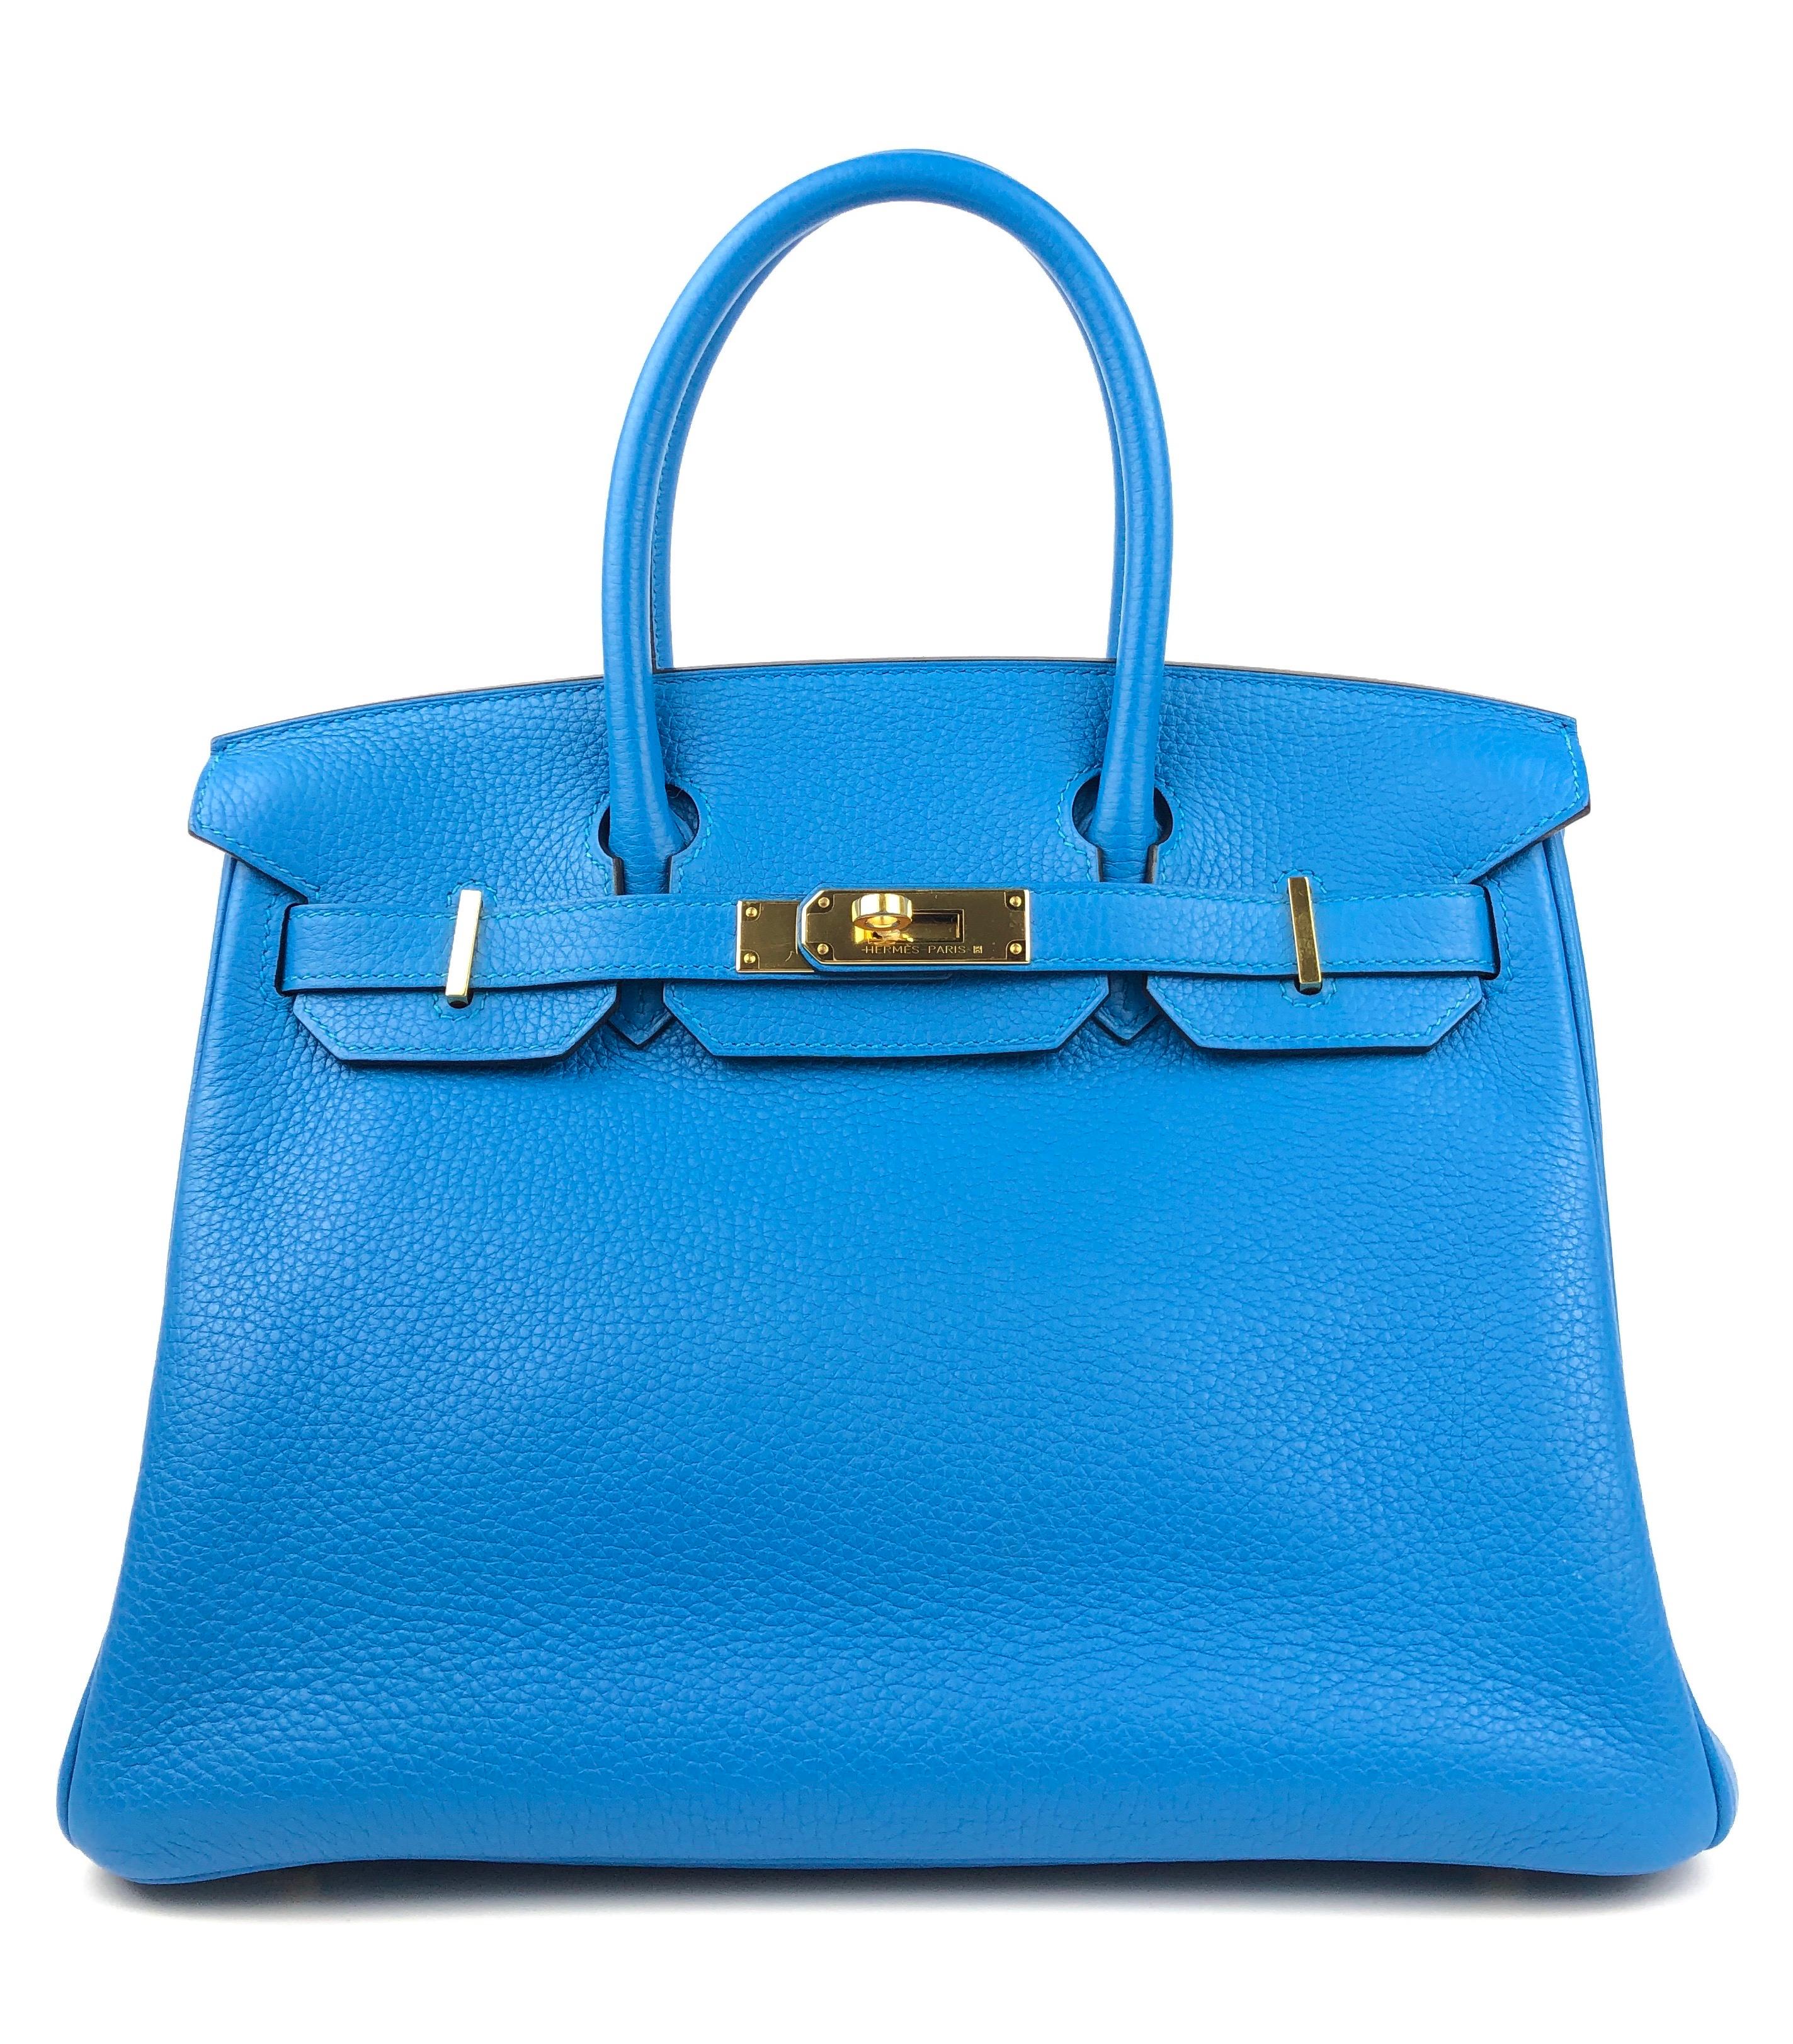 Stunning Hermes Birkin 30 Blue Zanzibar Gold Hardware.  Excellent Pristine Condition, Plastic on Hardware, Excellent corners and Structure. A Stamp 2017.

Shop with Confidence from Lux Addicts. Authenticity Guaranteed! 